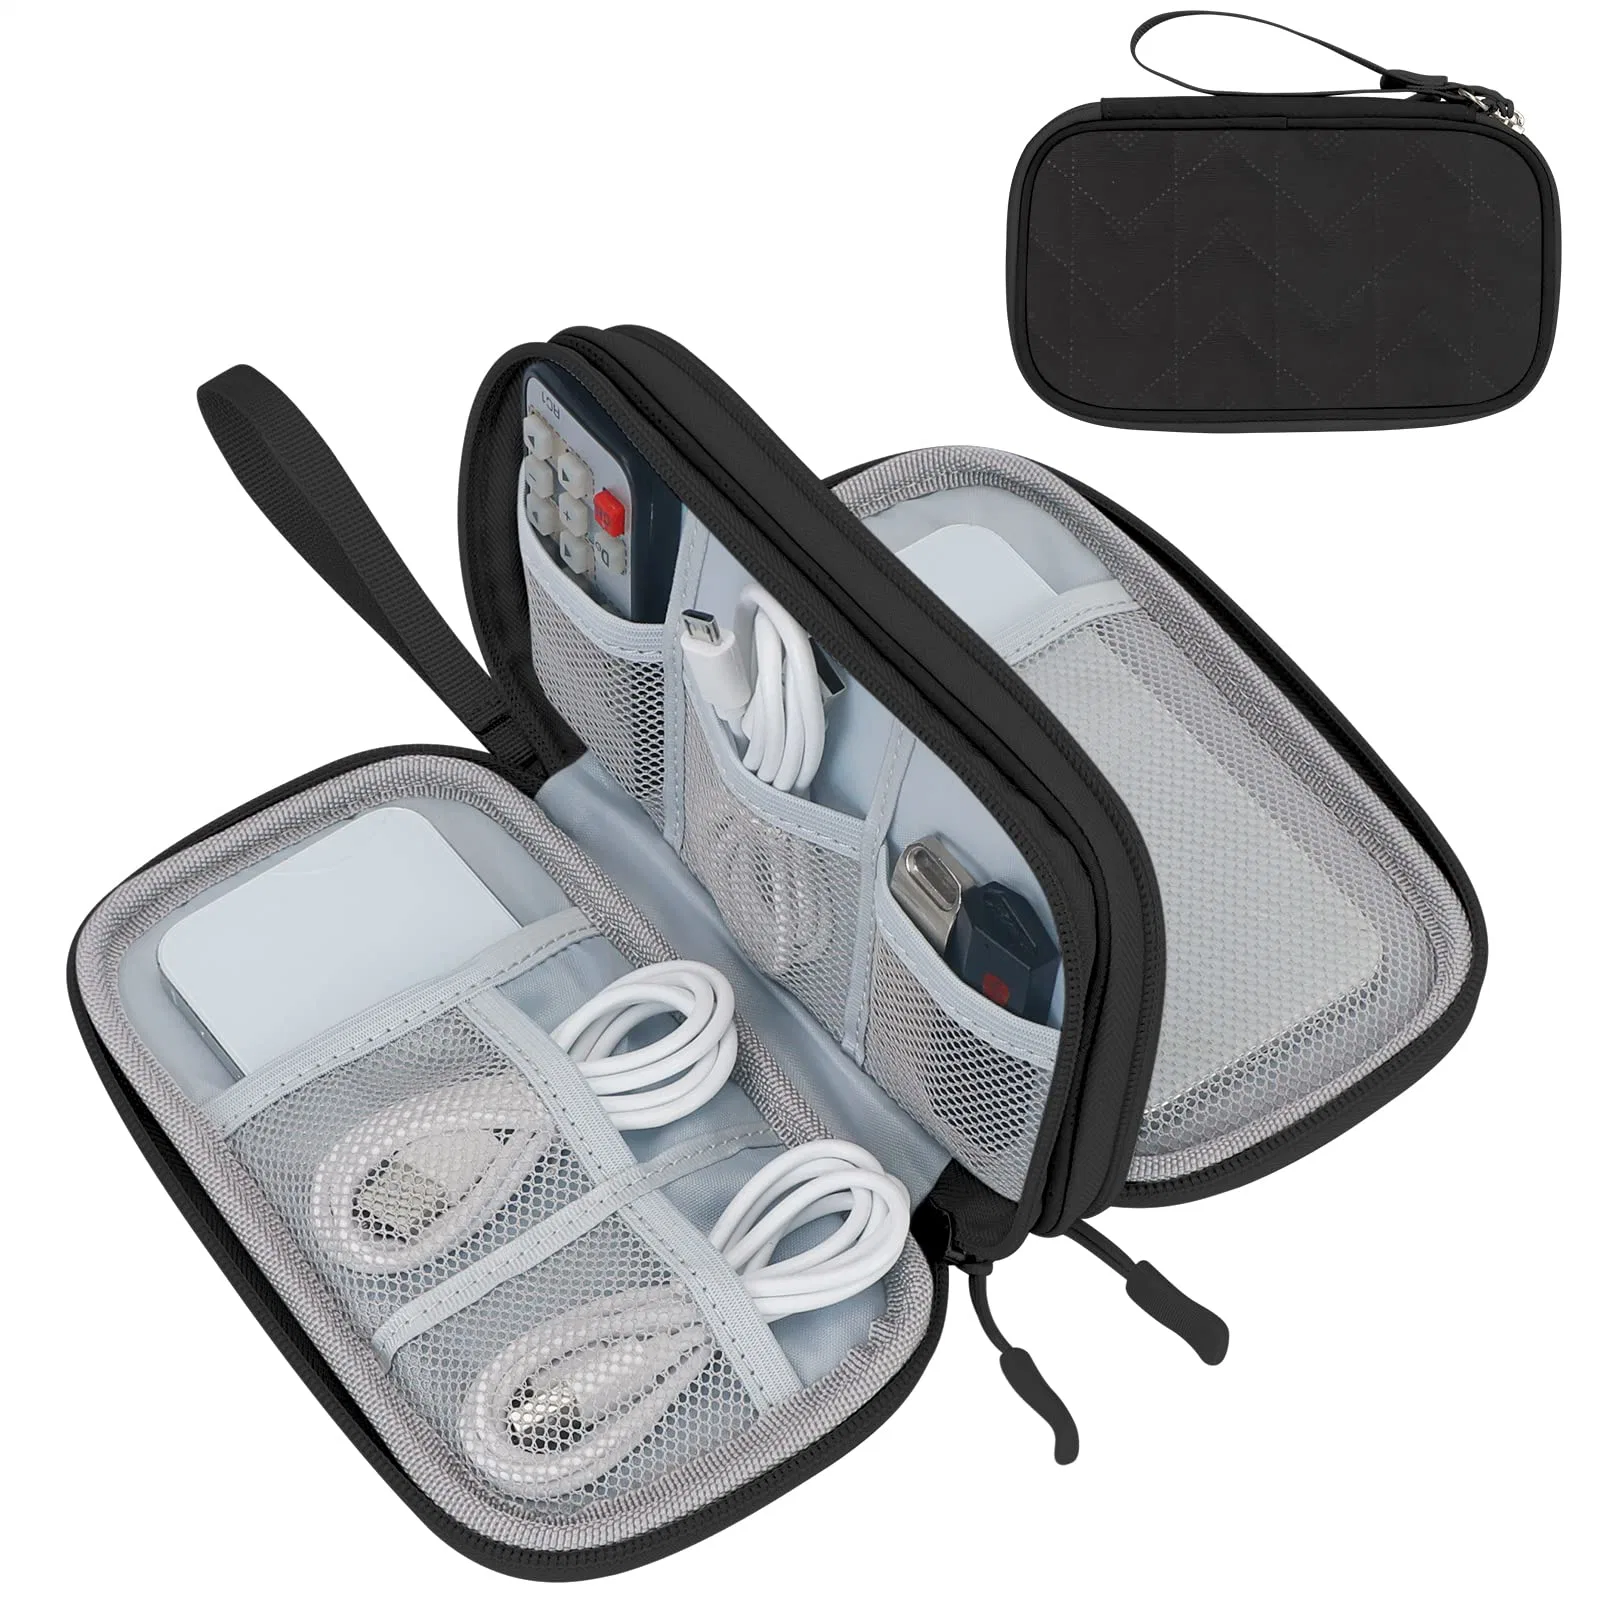 Electronic Organizer, Travel Cable Organizer Bag Pouch Electronic Accessories Carry Case Portable All-in-One Storage Bag for Cable, Cord, Charger, Phone